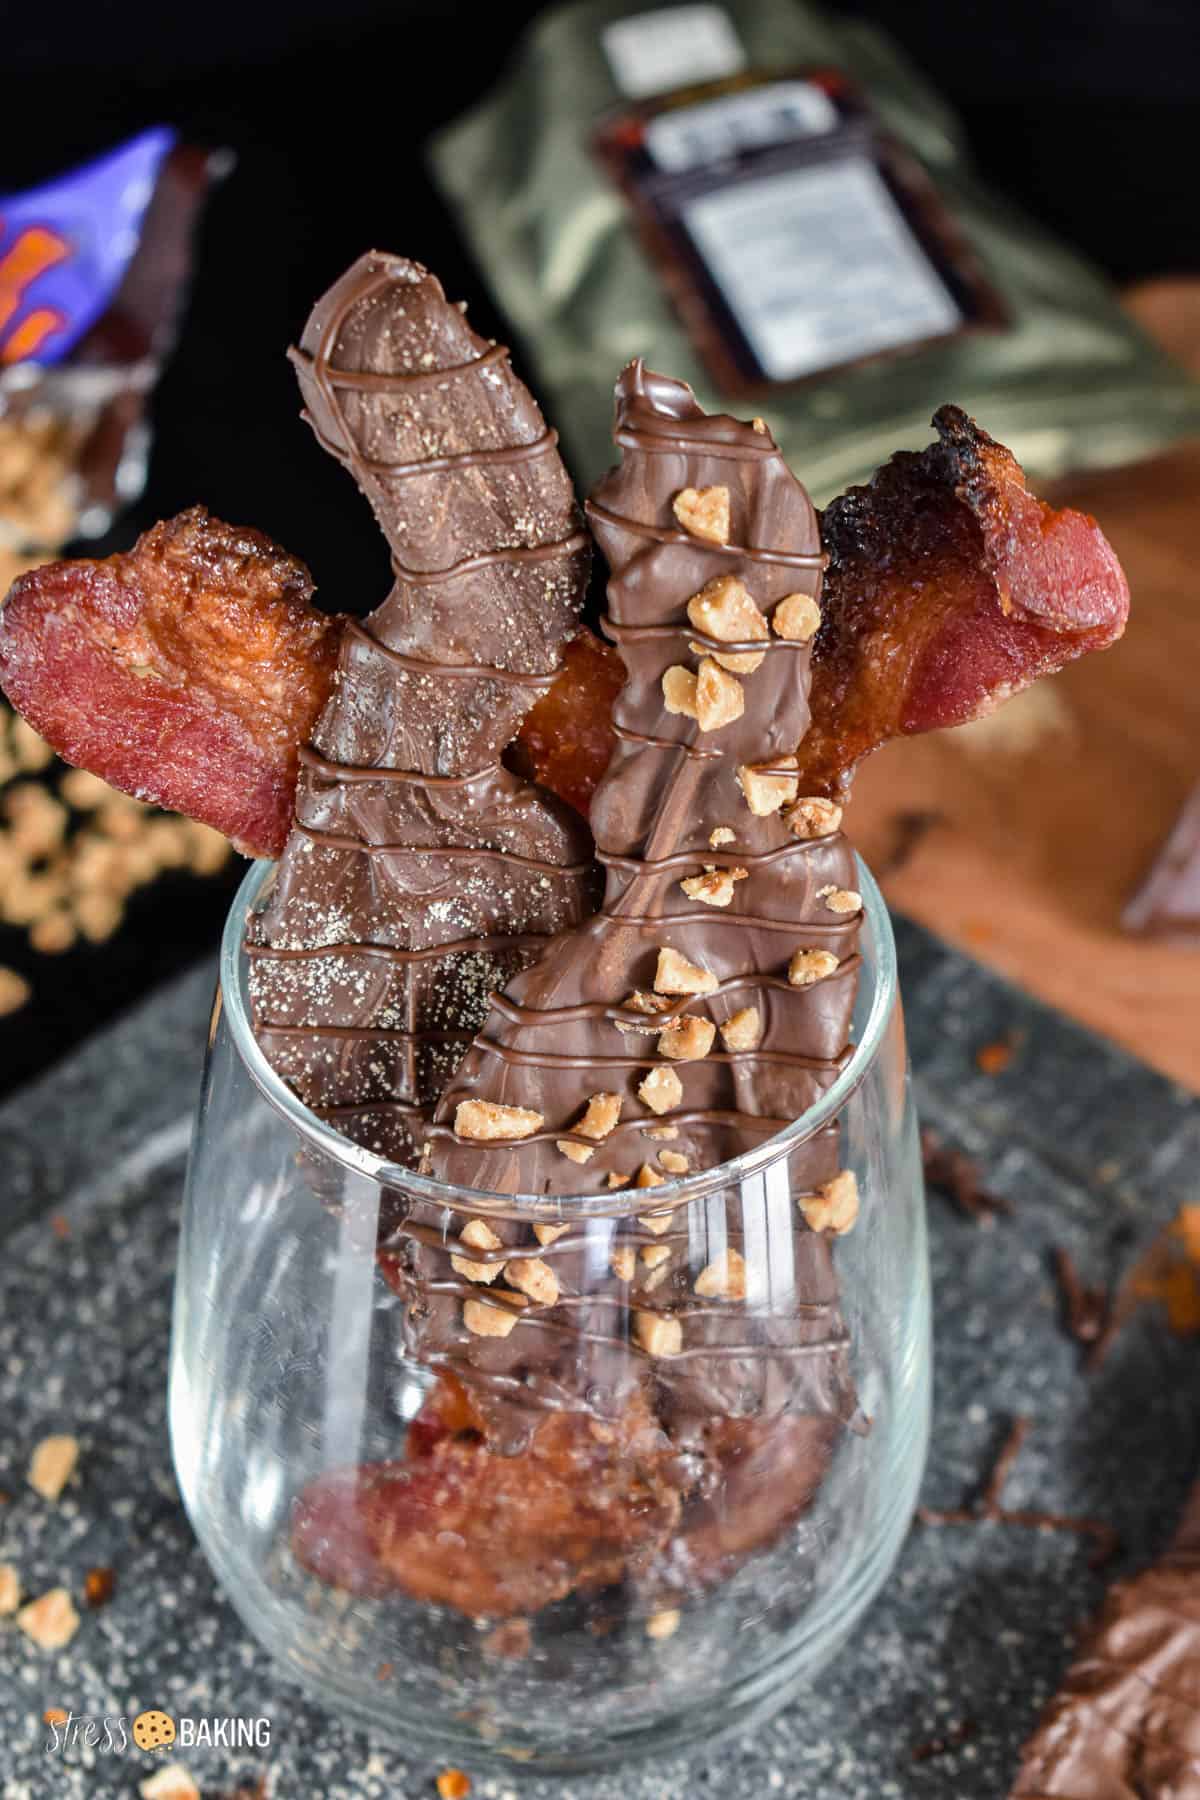 Chocolate dipped bacon strips coated in sugar and toffee pieces sitting in a clear glass